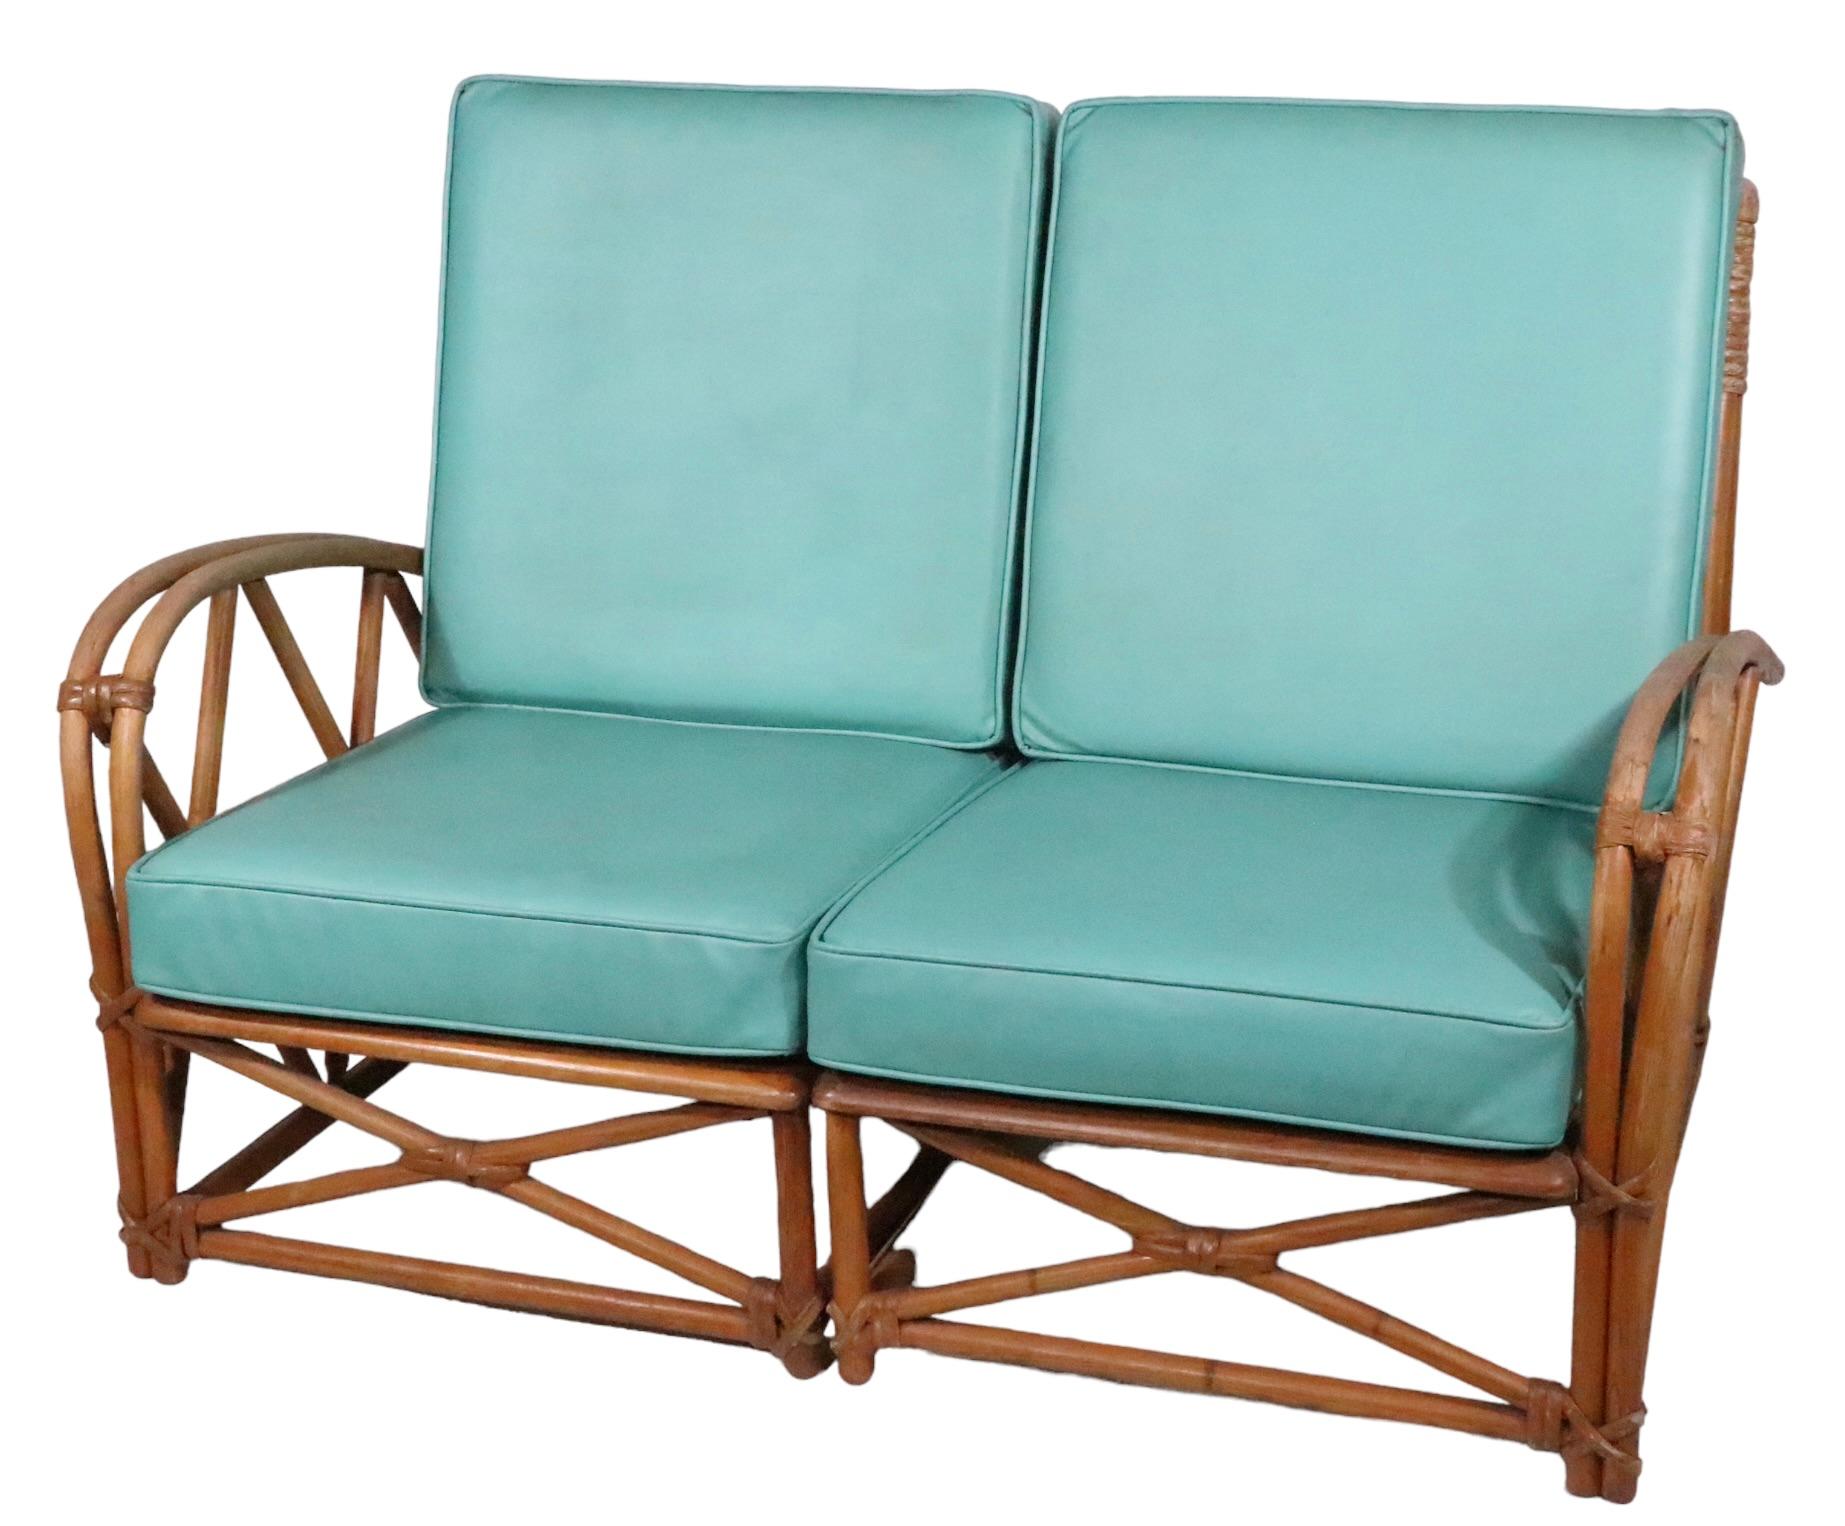  Mid Century Bentwood Bamboo Style Loveseat Sofa by Heywood Wakefield c. 1950's For Sale 11